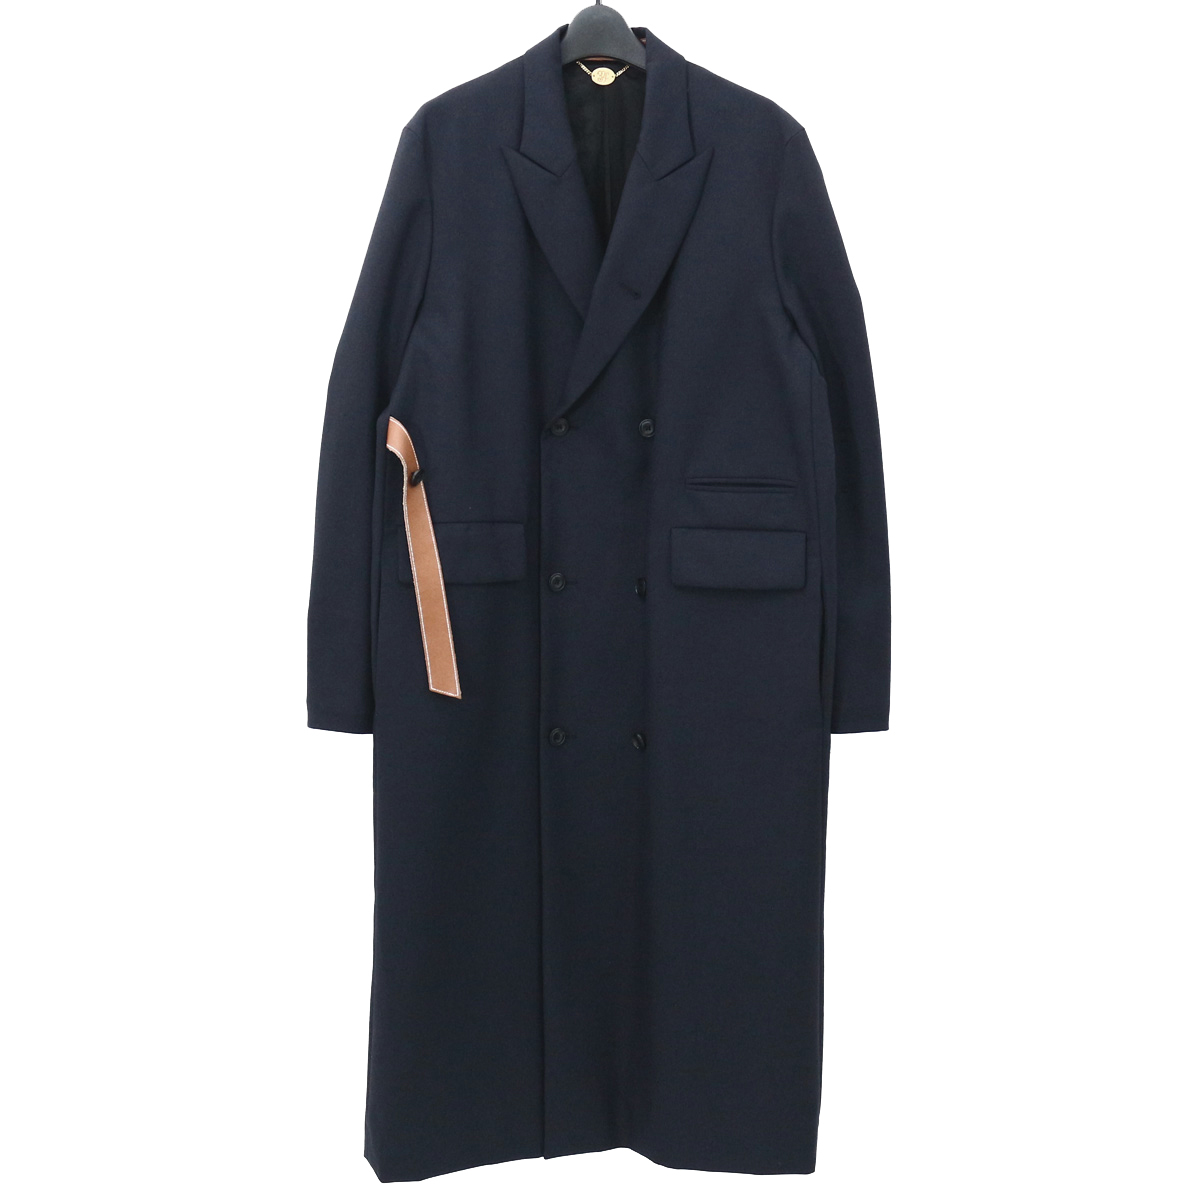 SUNSEA サンシー 20AW NAVY DOUBLE-BREASTED COAT ダブルブレステッド 